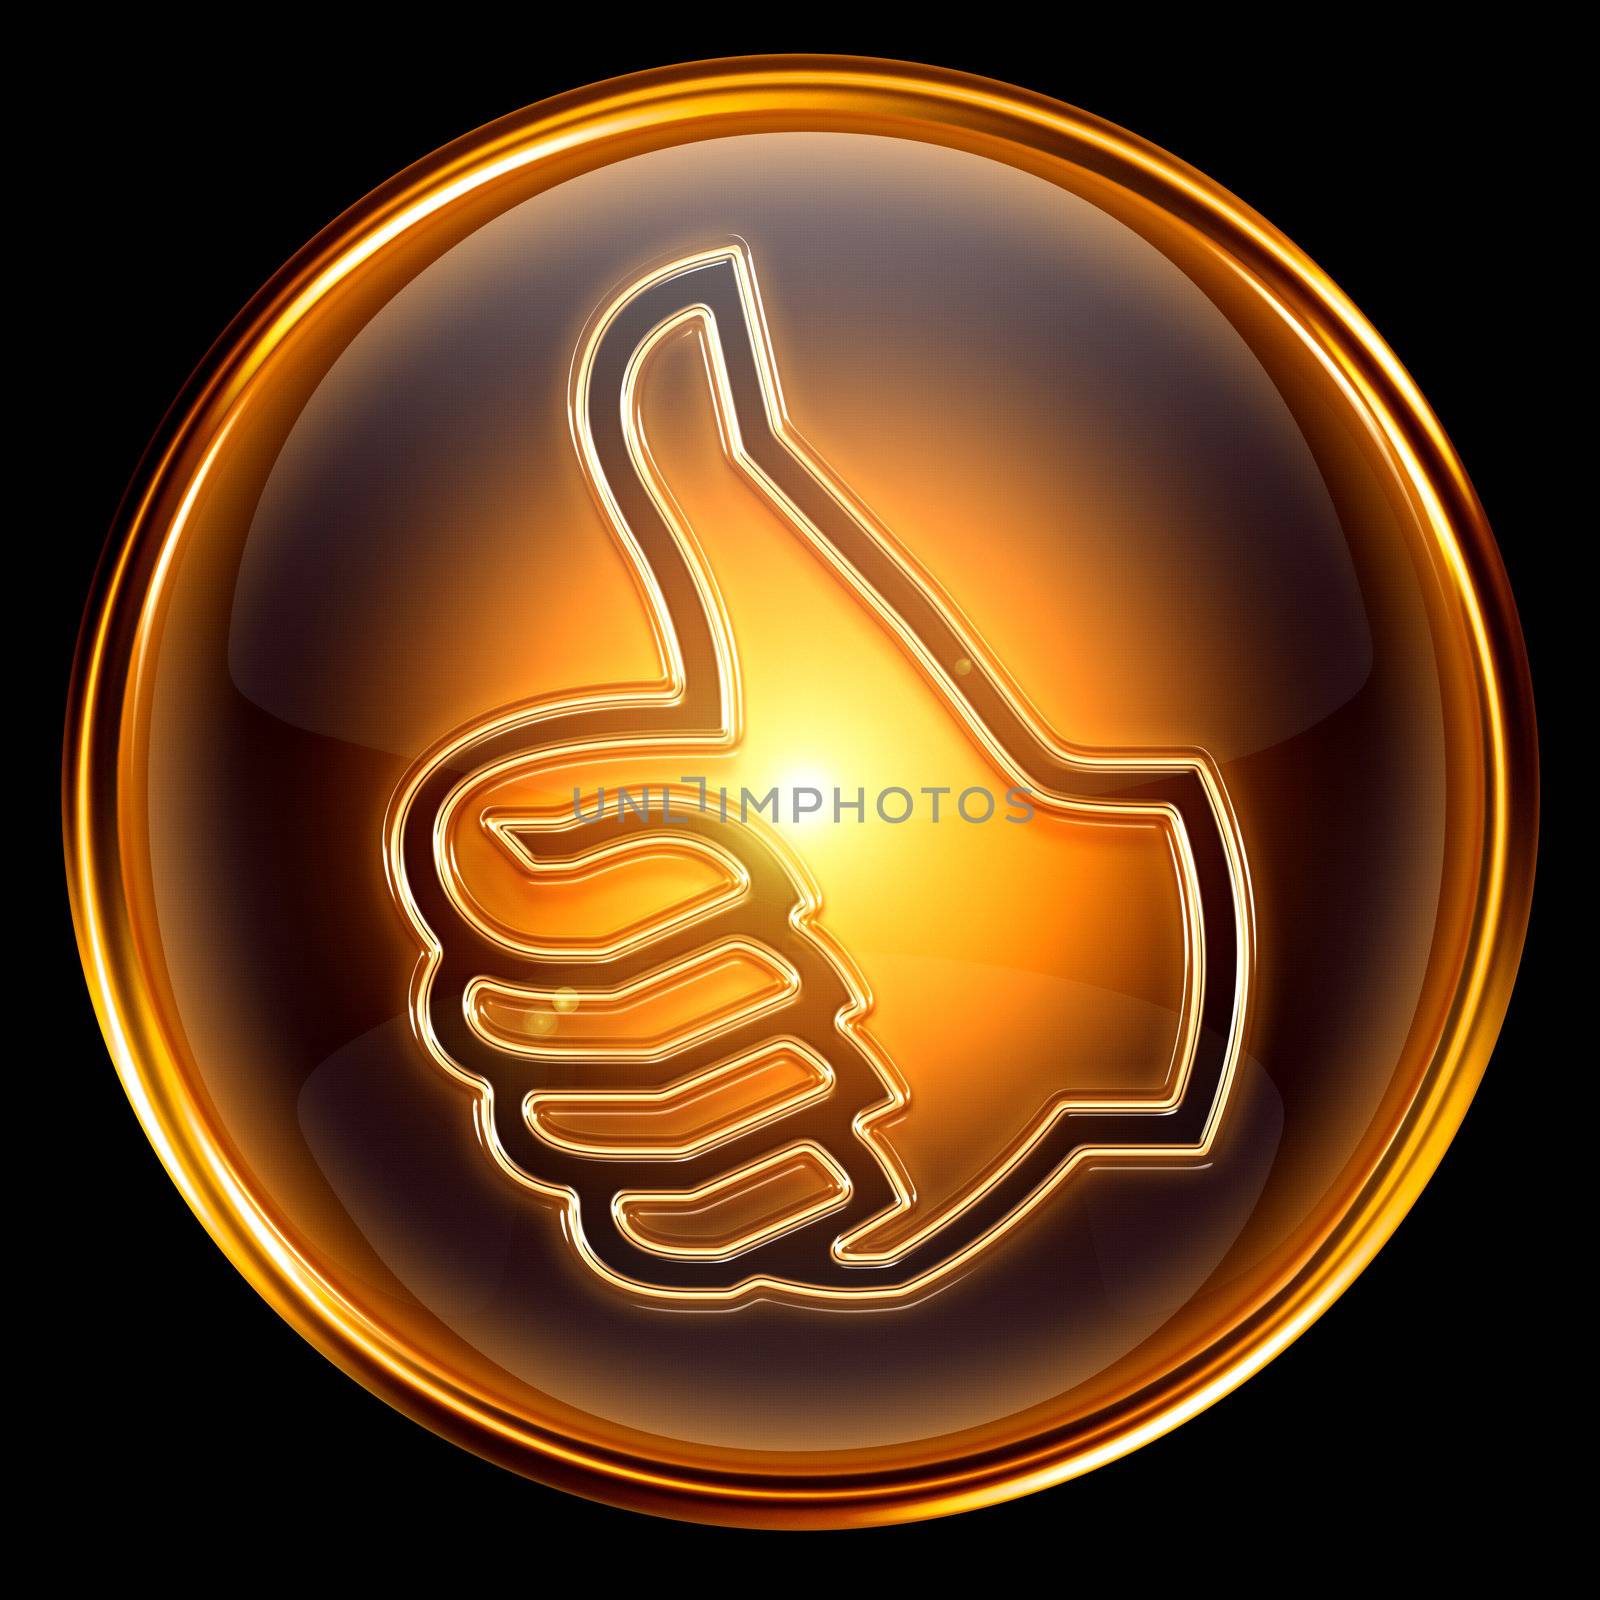 thumb up icon golden, isolated on black background by zeffss